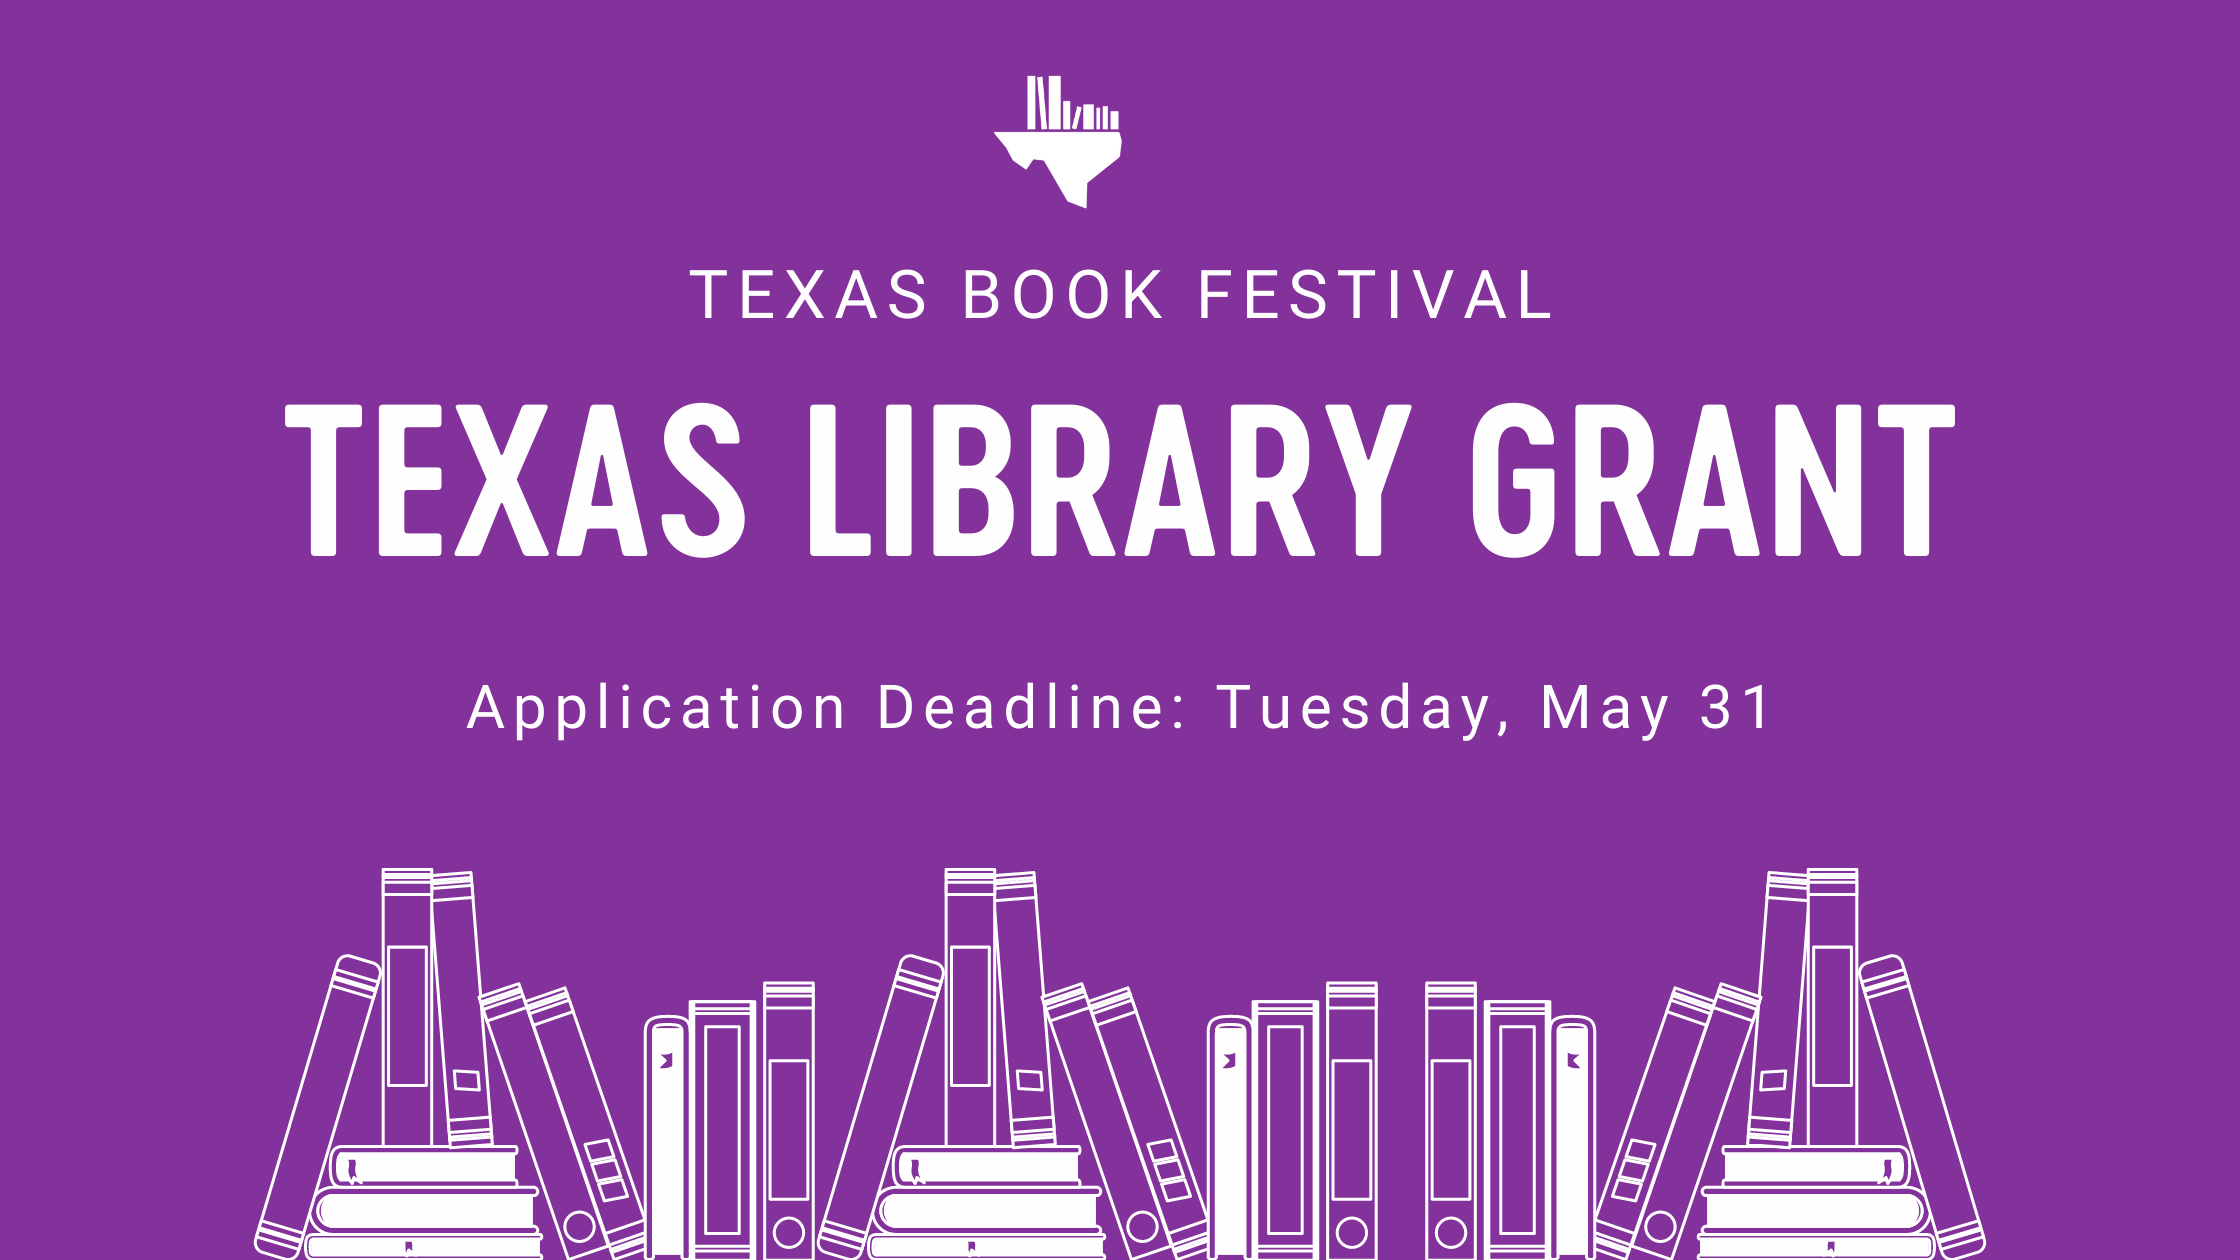 Applications for 2022 Texas Library Grants